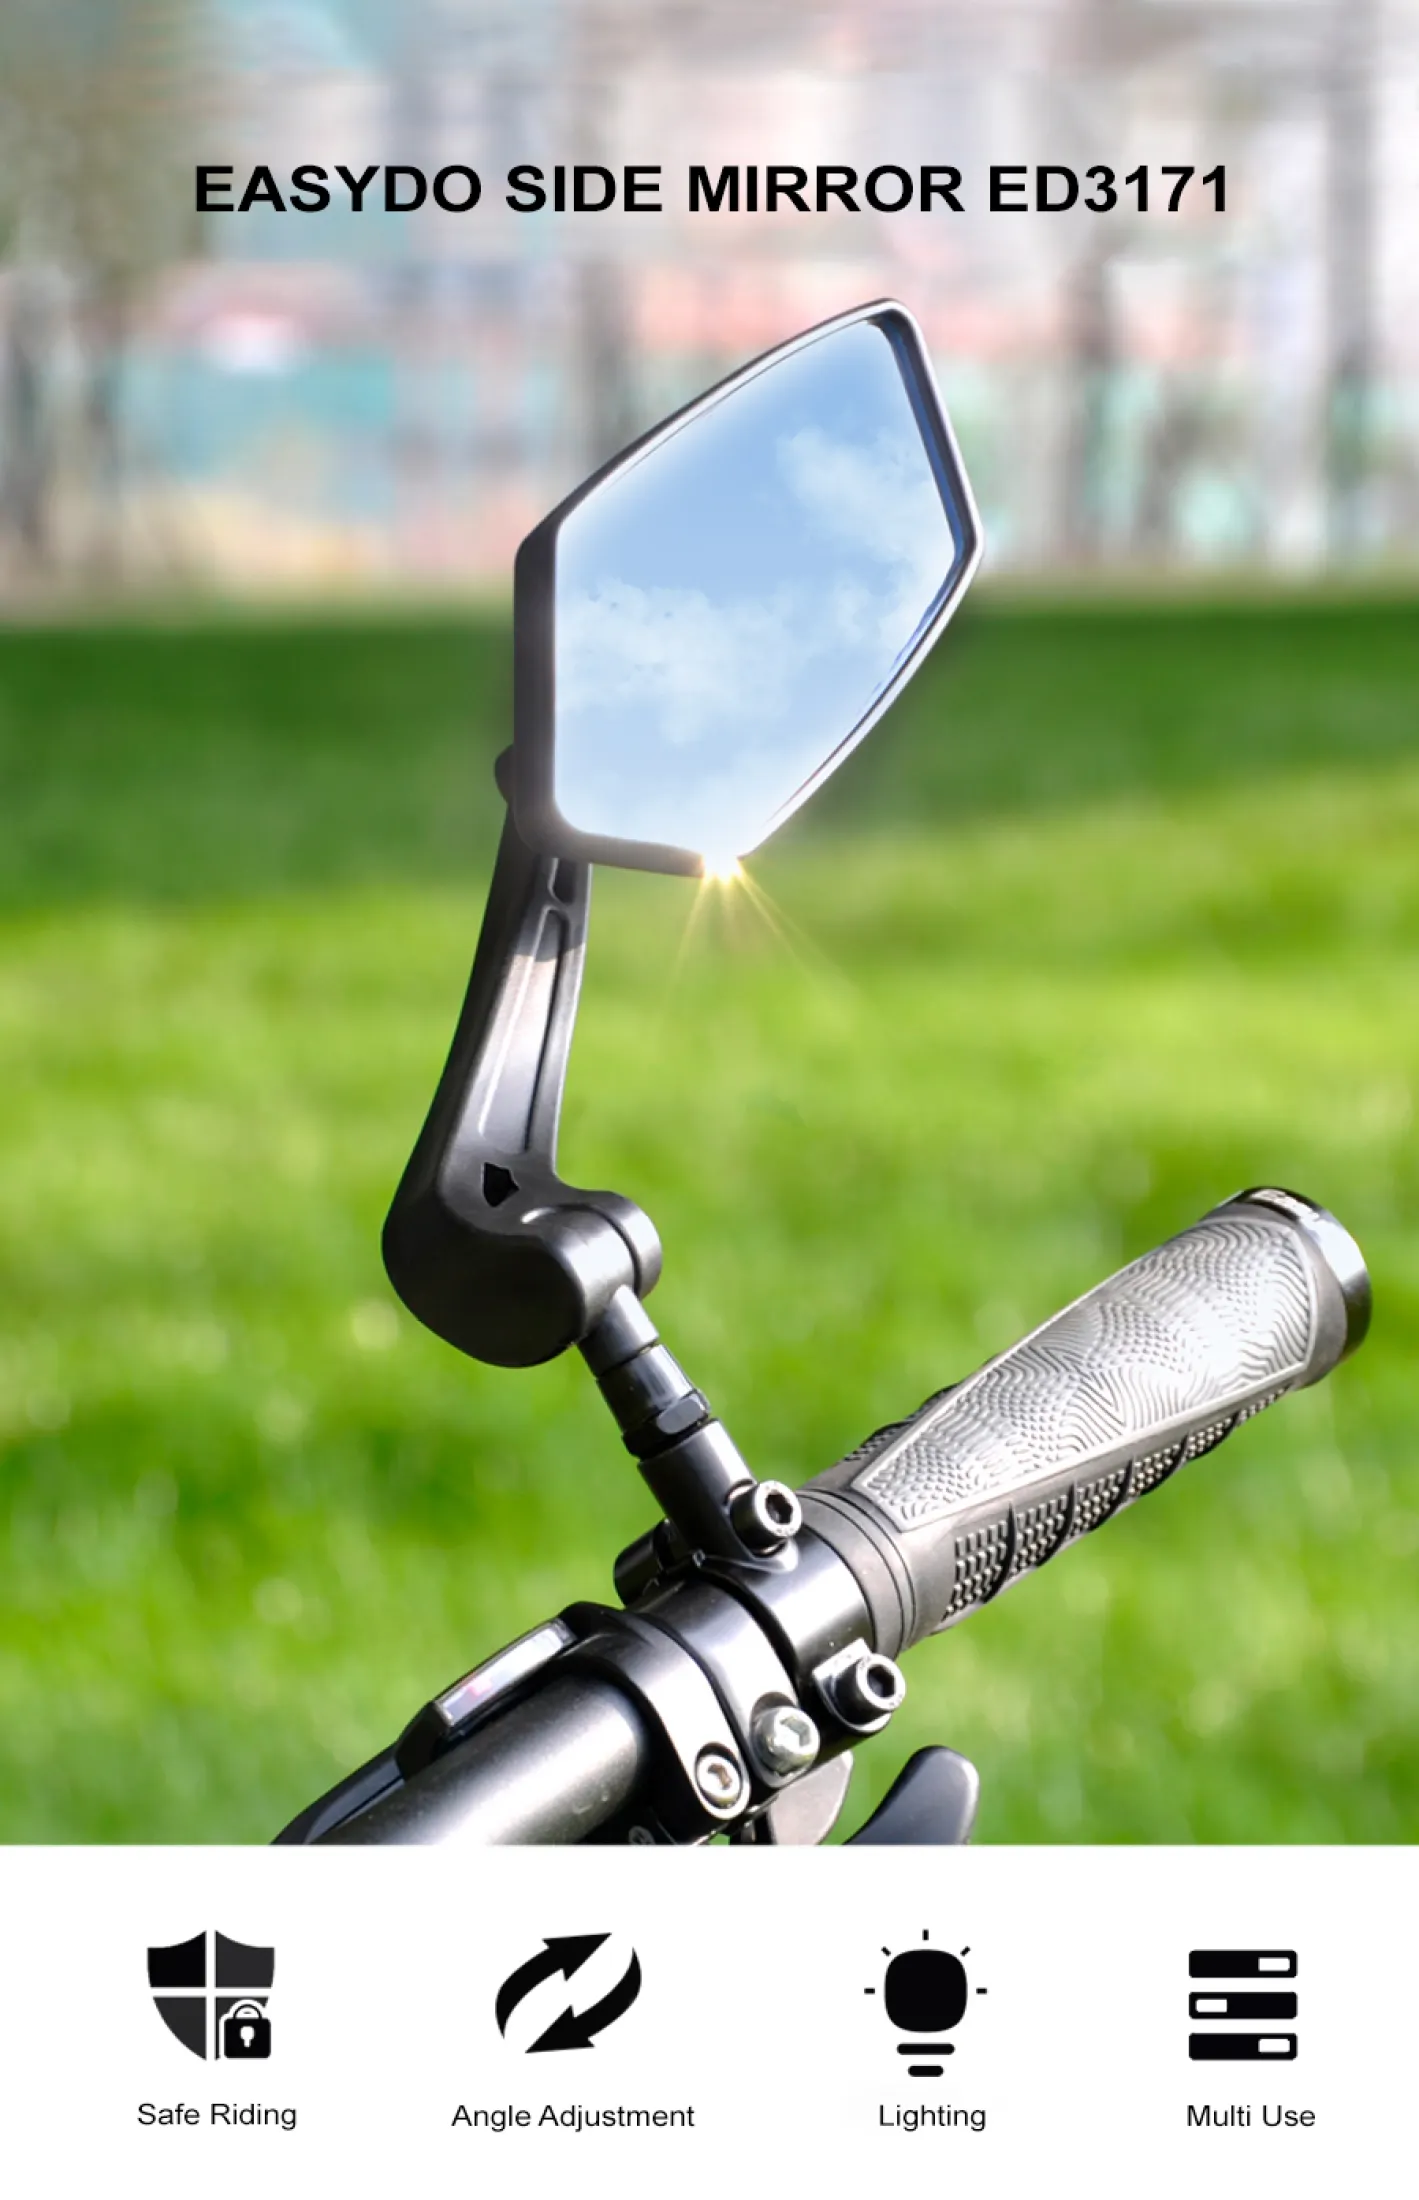 rear view mirror for bike riding